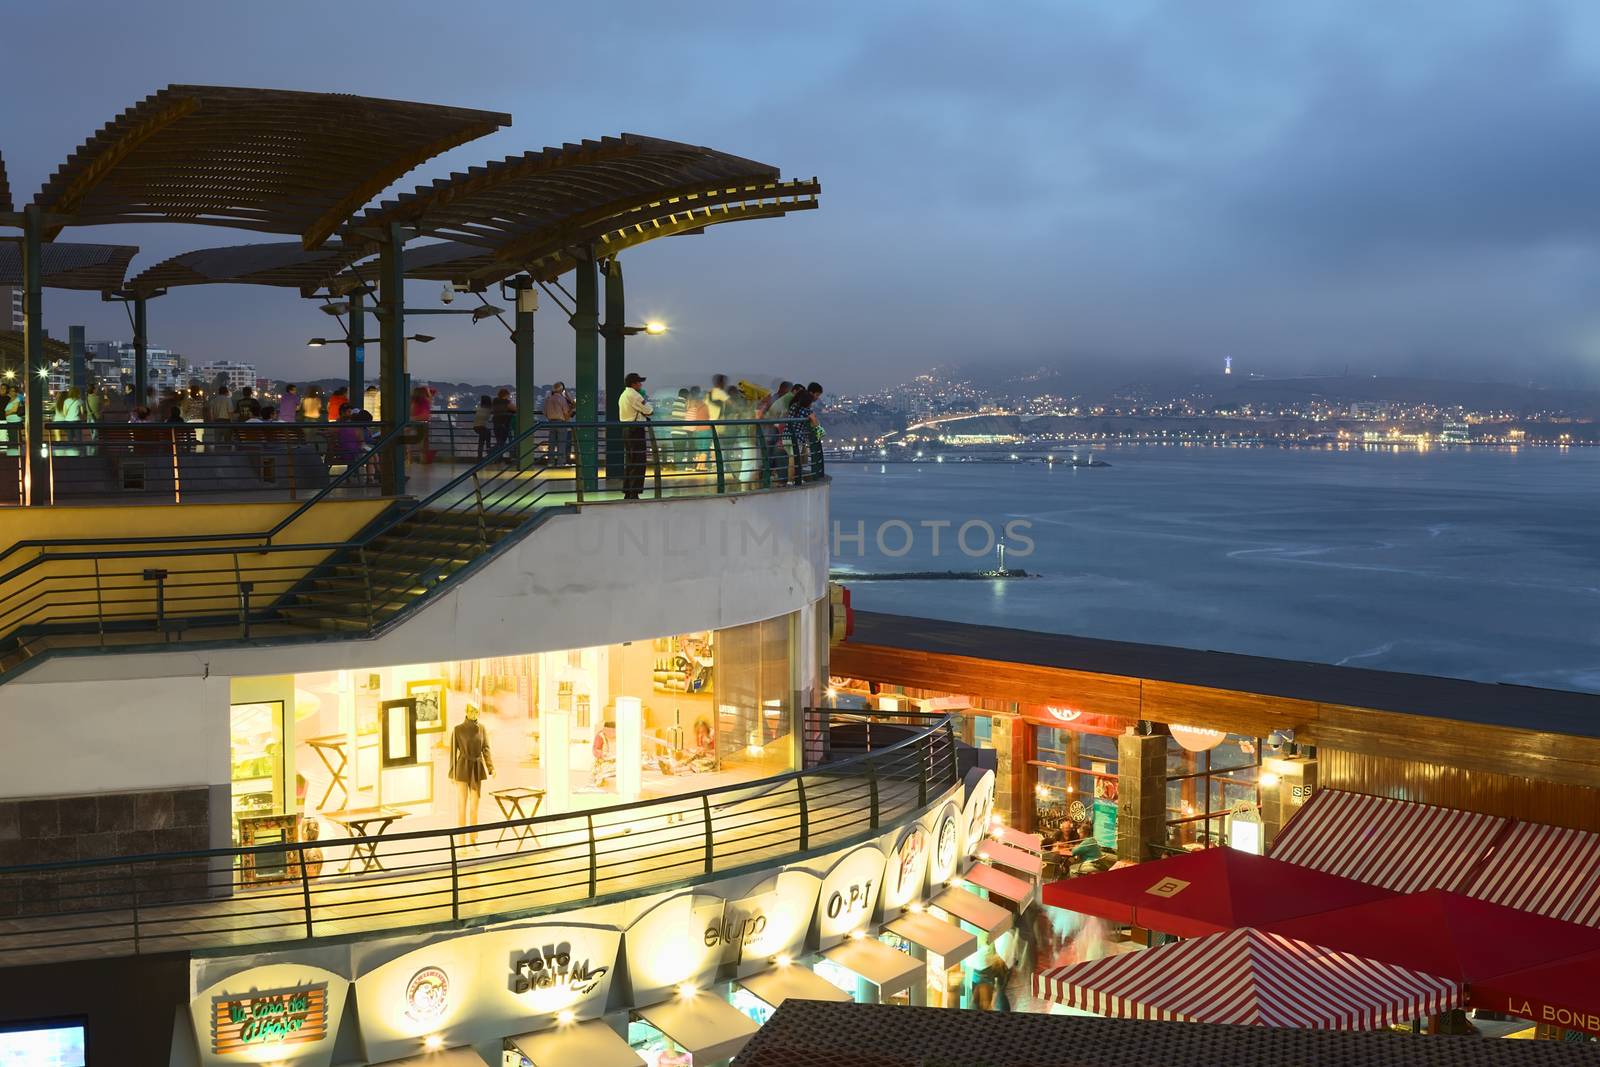 LIMA, PERU - MARCH 11, 2012: Unidentified people enjoying the view over the Pacific coast at the shopping mall Larcomar in Miraflores in the evening on March 11, 2012 in Lima, Peru. Larcomar is a popular mall on the coast, here with view over the coast of the district of Chorrillos to the South.